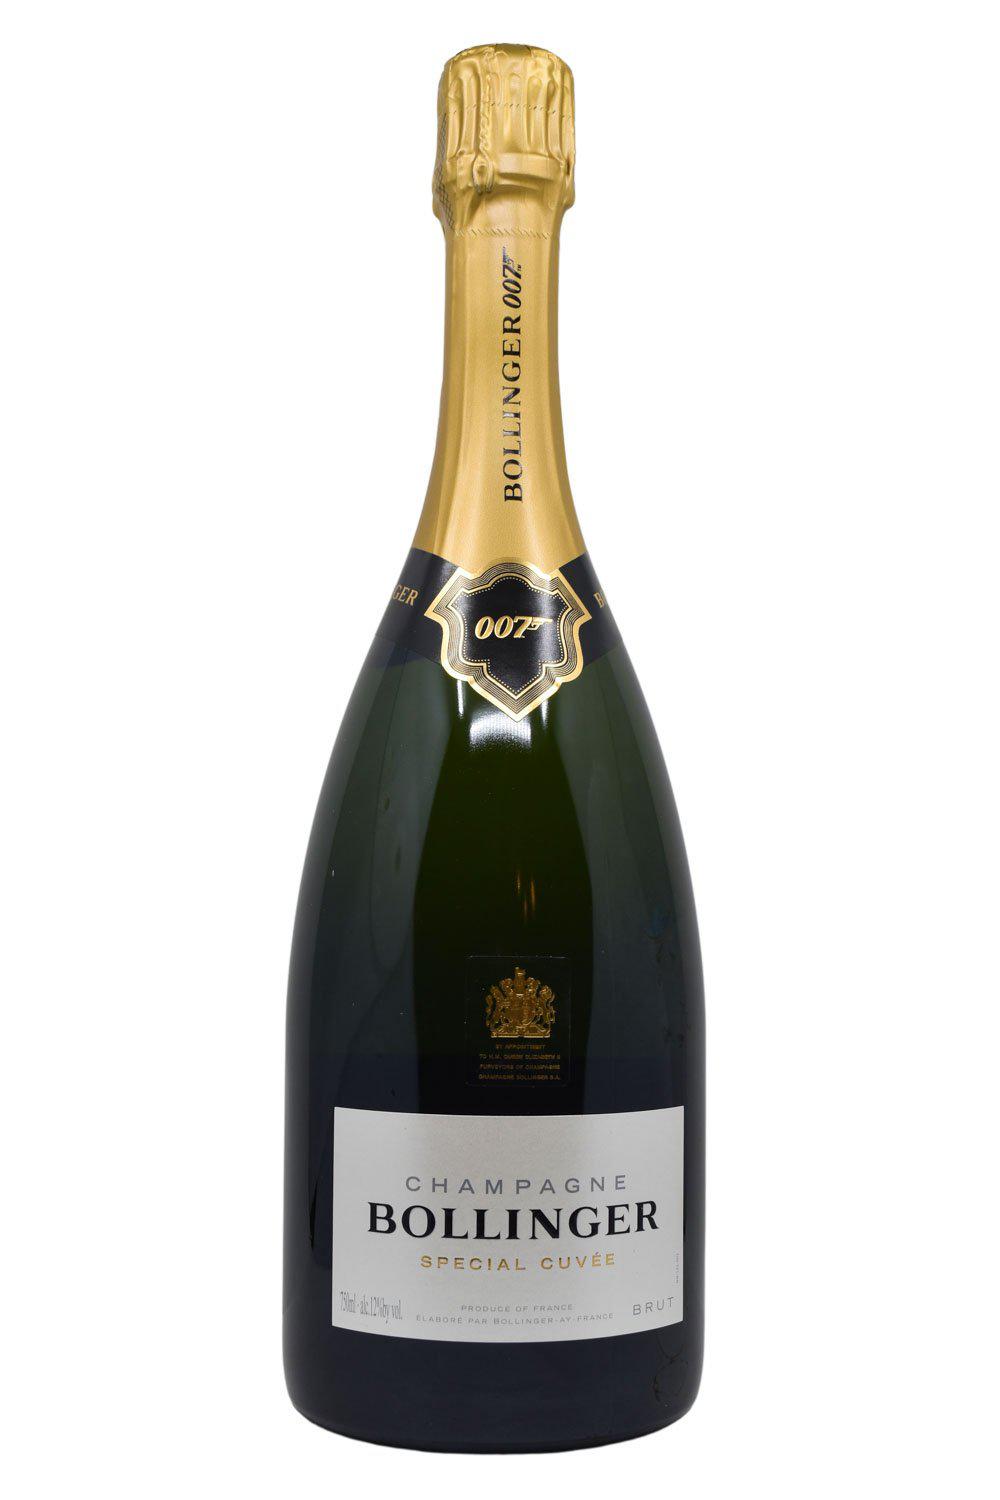 Bollinger Champagne Brut Special Cuvee 007 Limited Edition NV – Flatiron SF